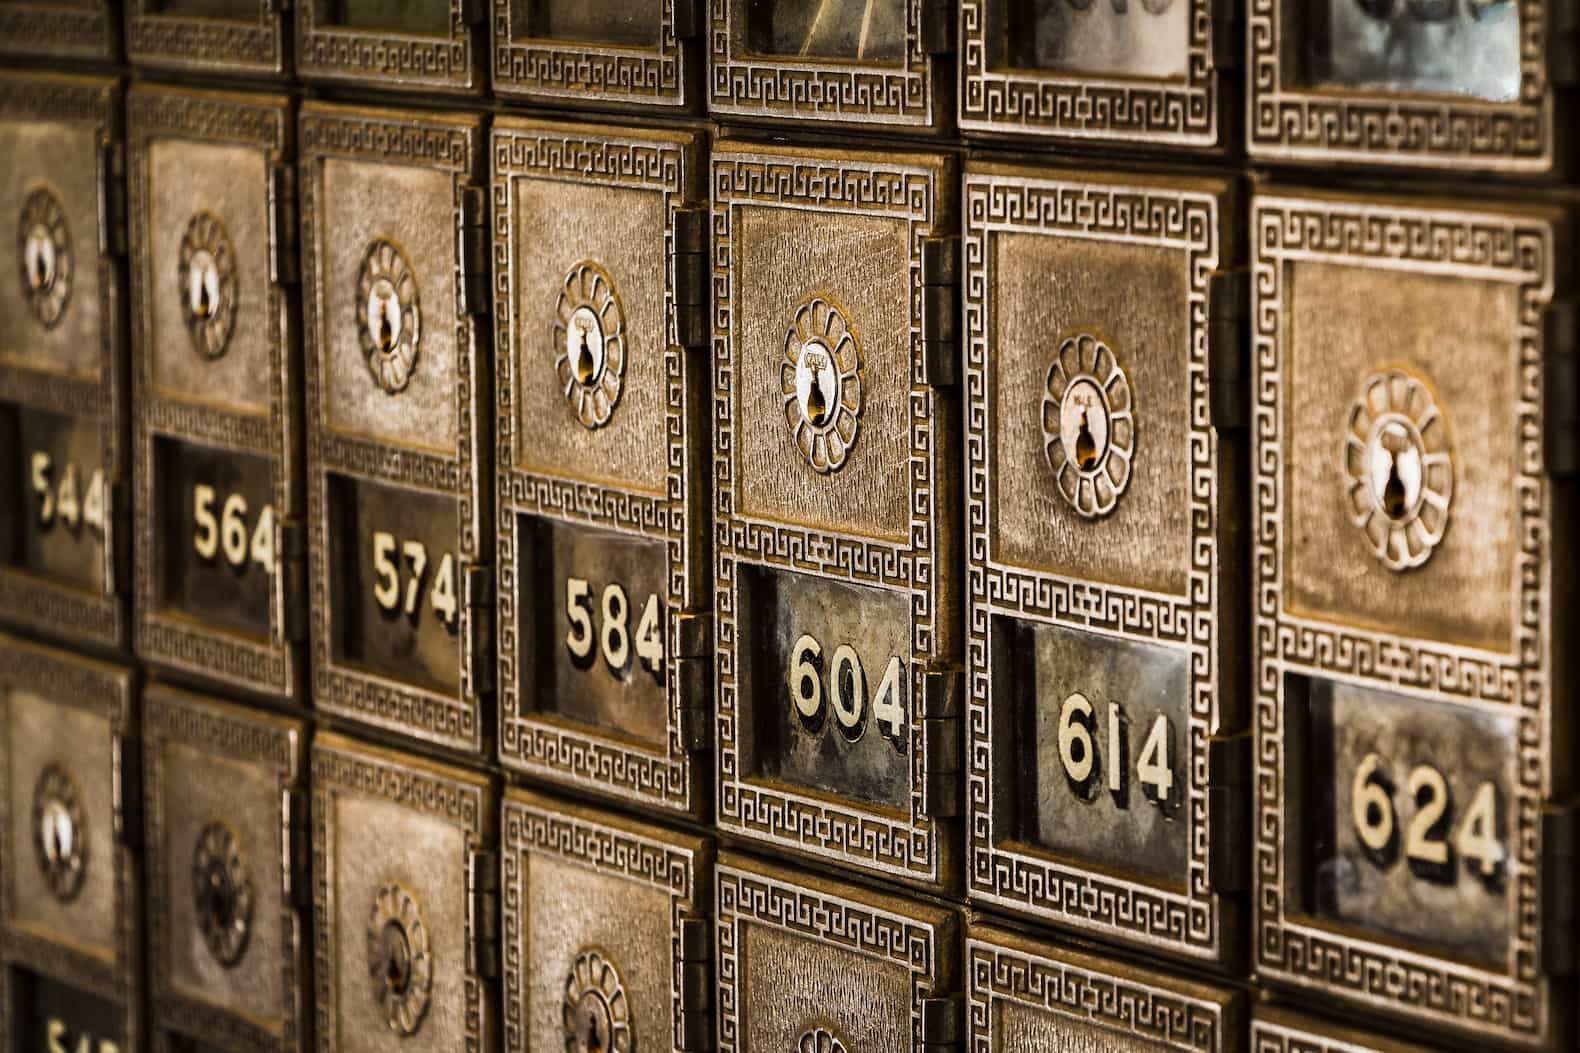 A row of deposit boxes in a bank vault